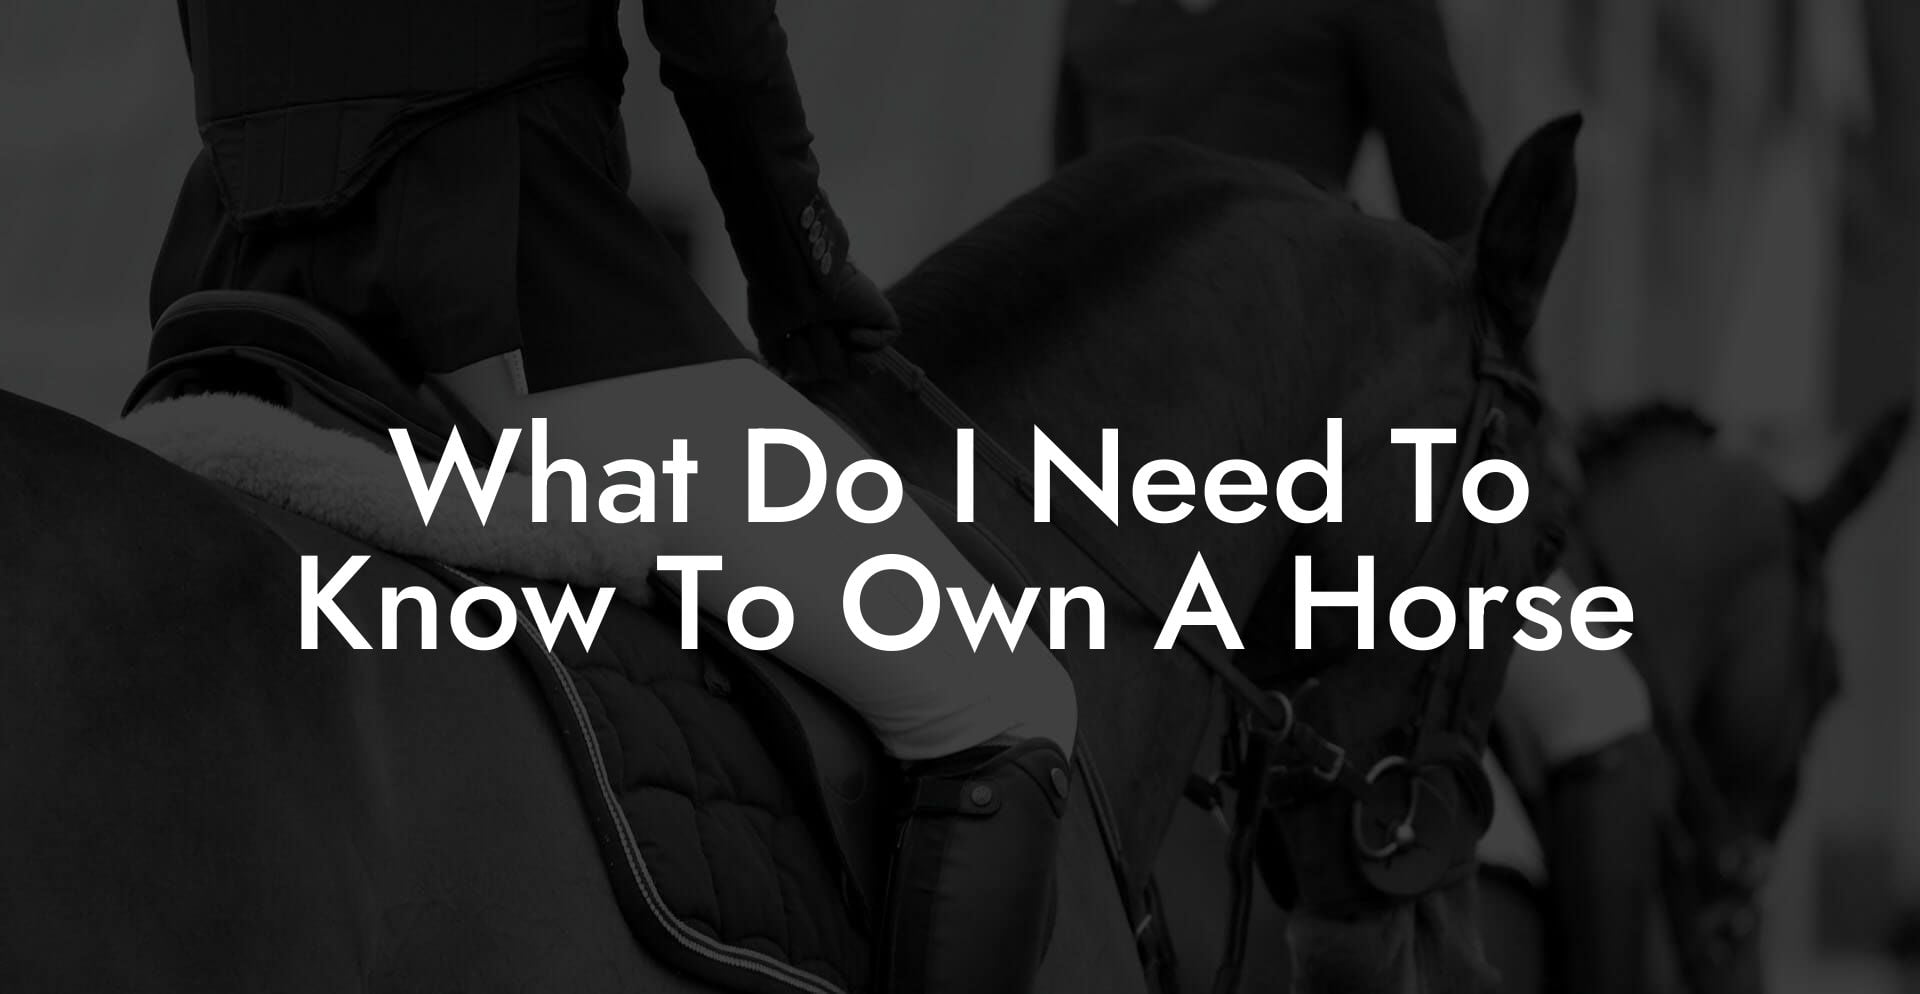 What Do I Need To Know To Own A Horse